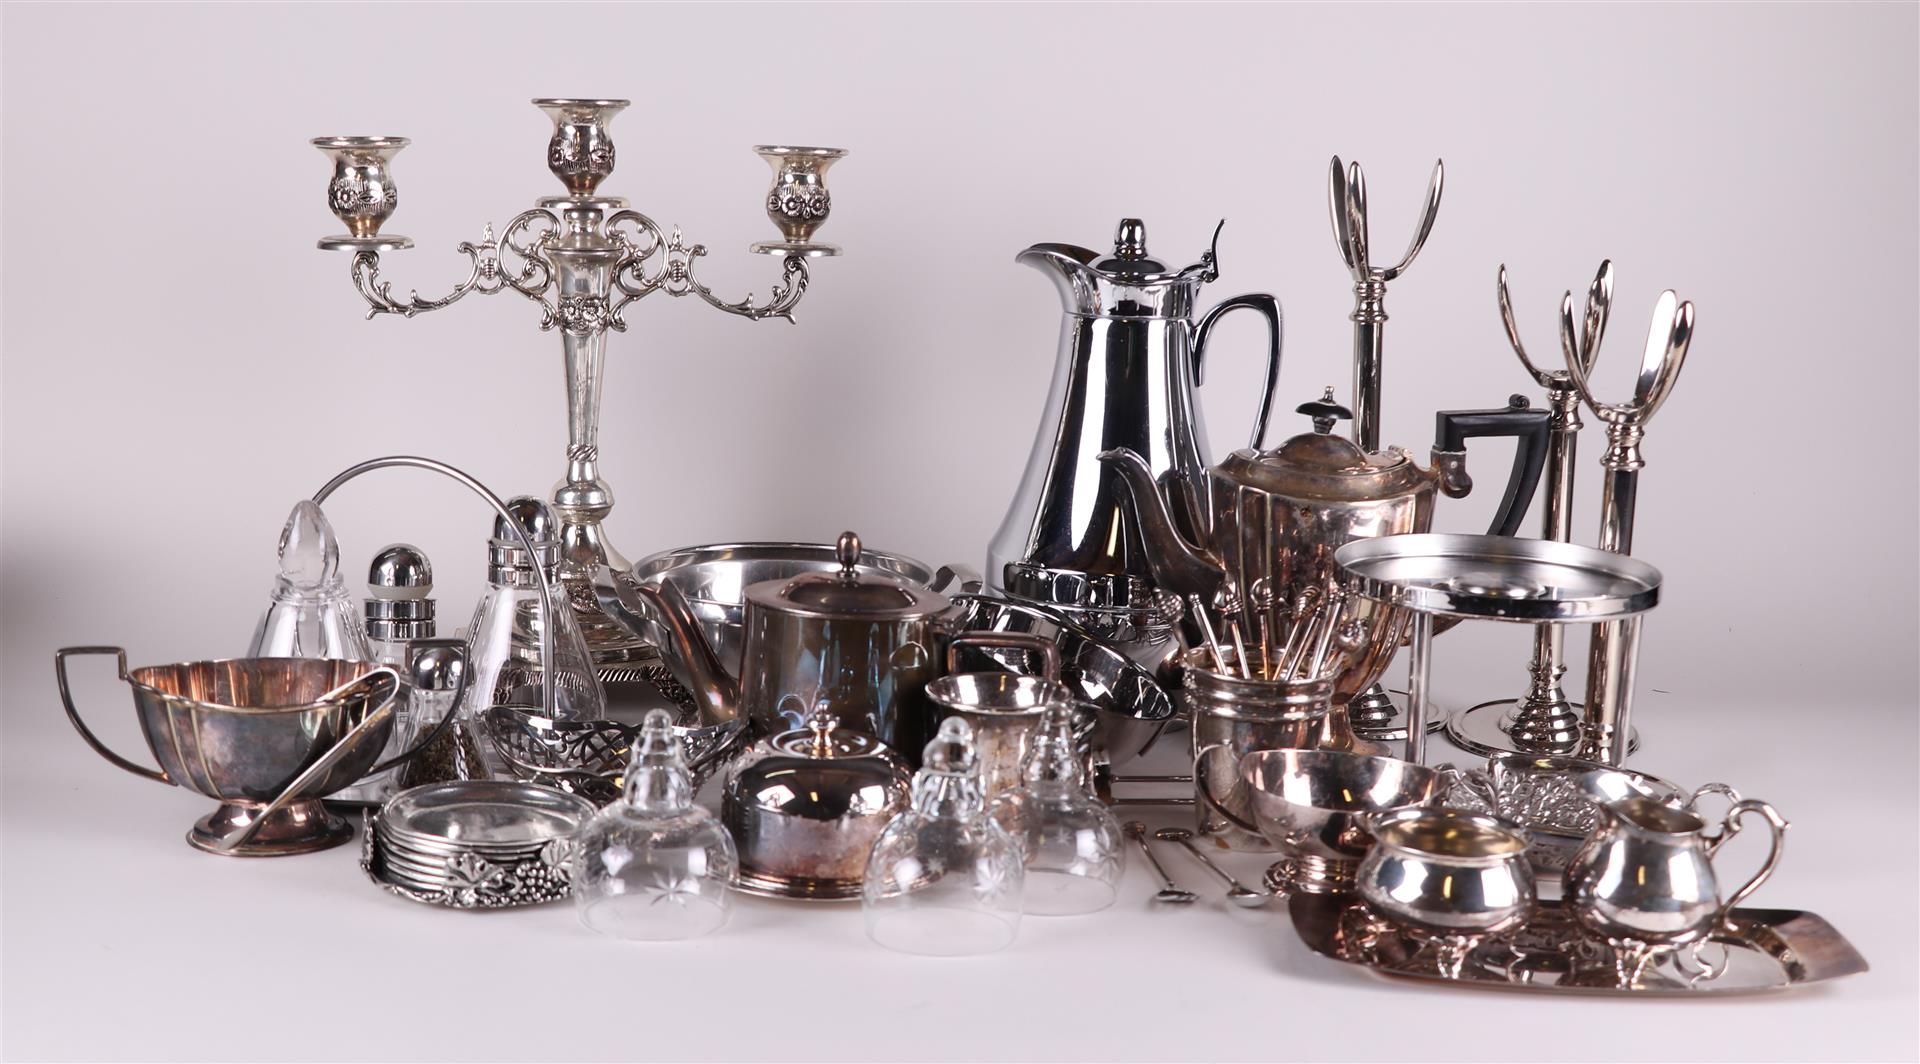 A lot of various (silver plated) objects including a candlestick and a tea set.